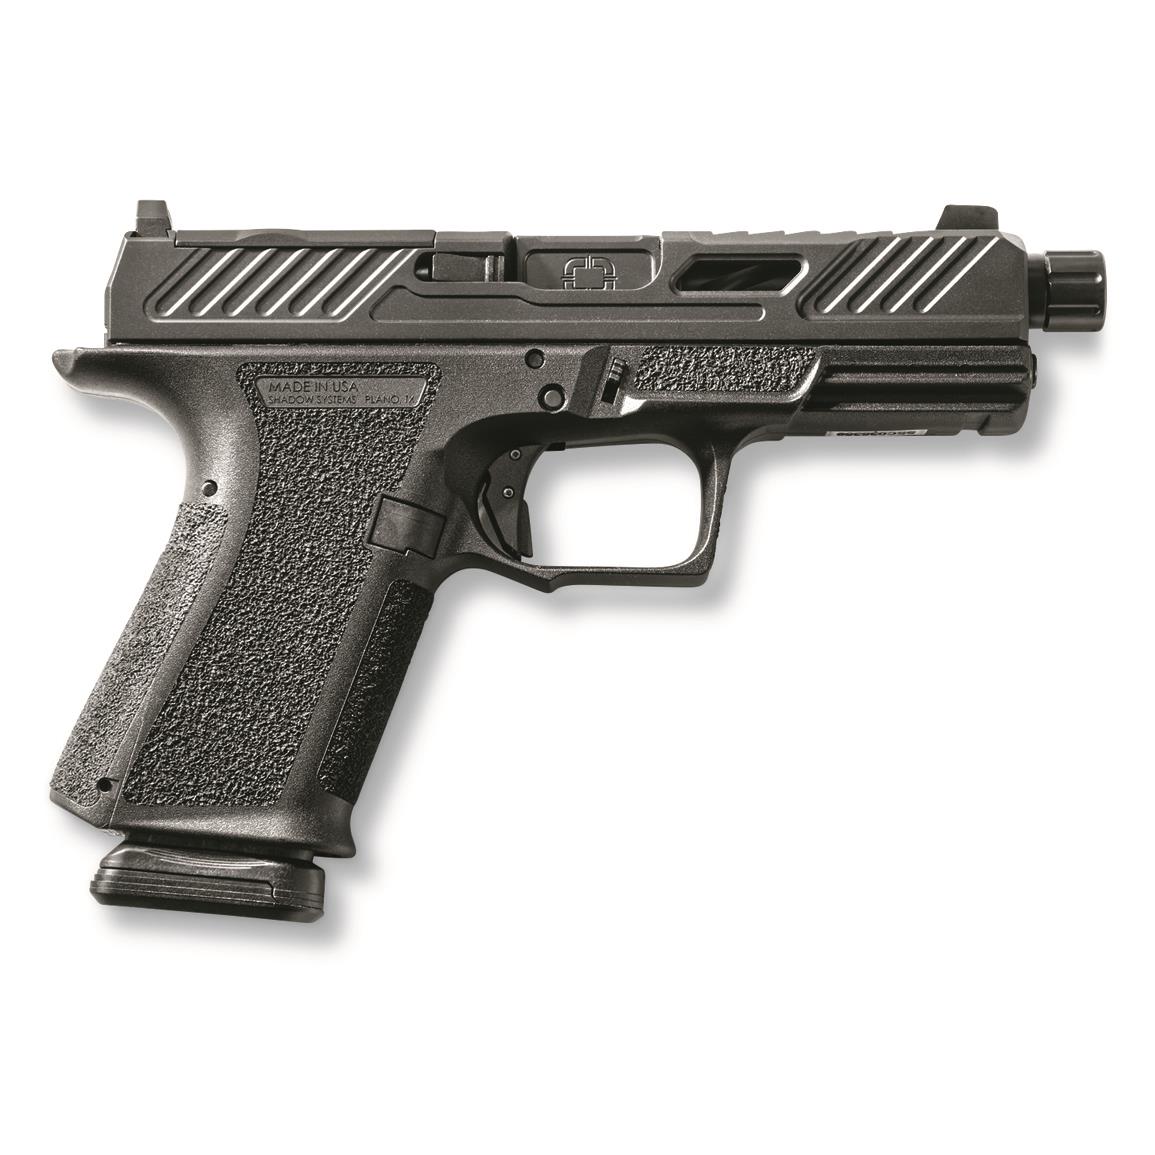 Shadow Systems MR920 Elite, Semi-automatic, 9mm, 4.5" Threaded Barrel, 15+1 Rounds